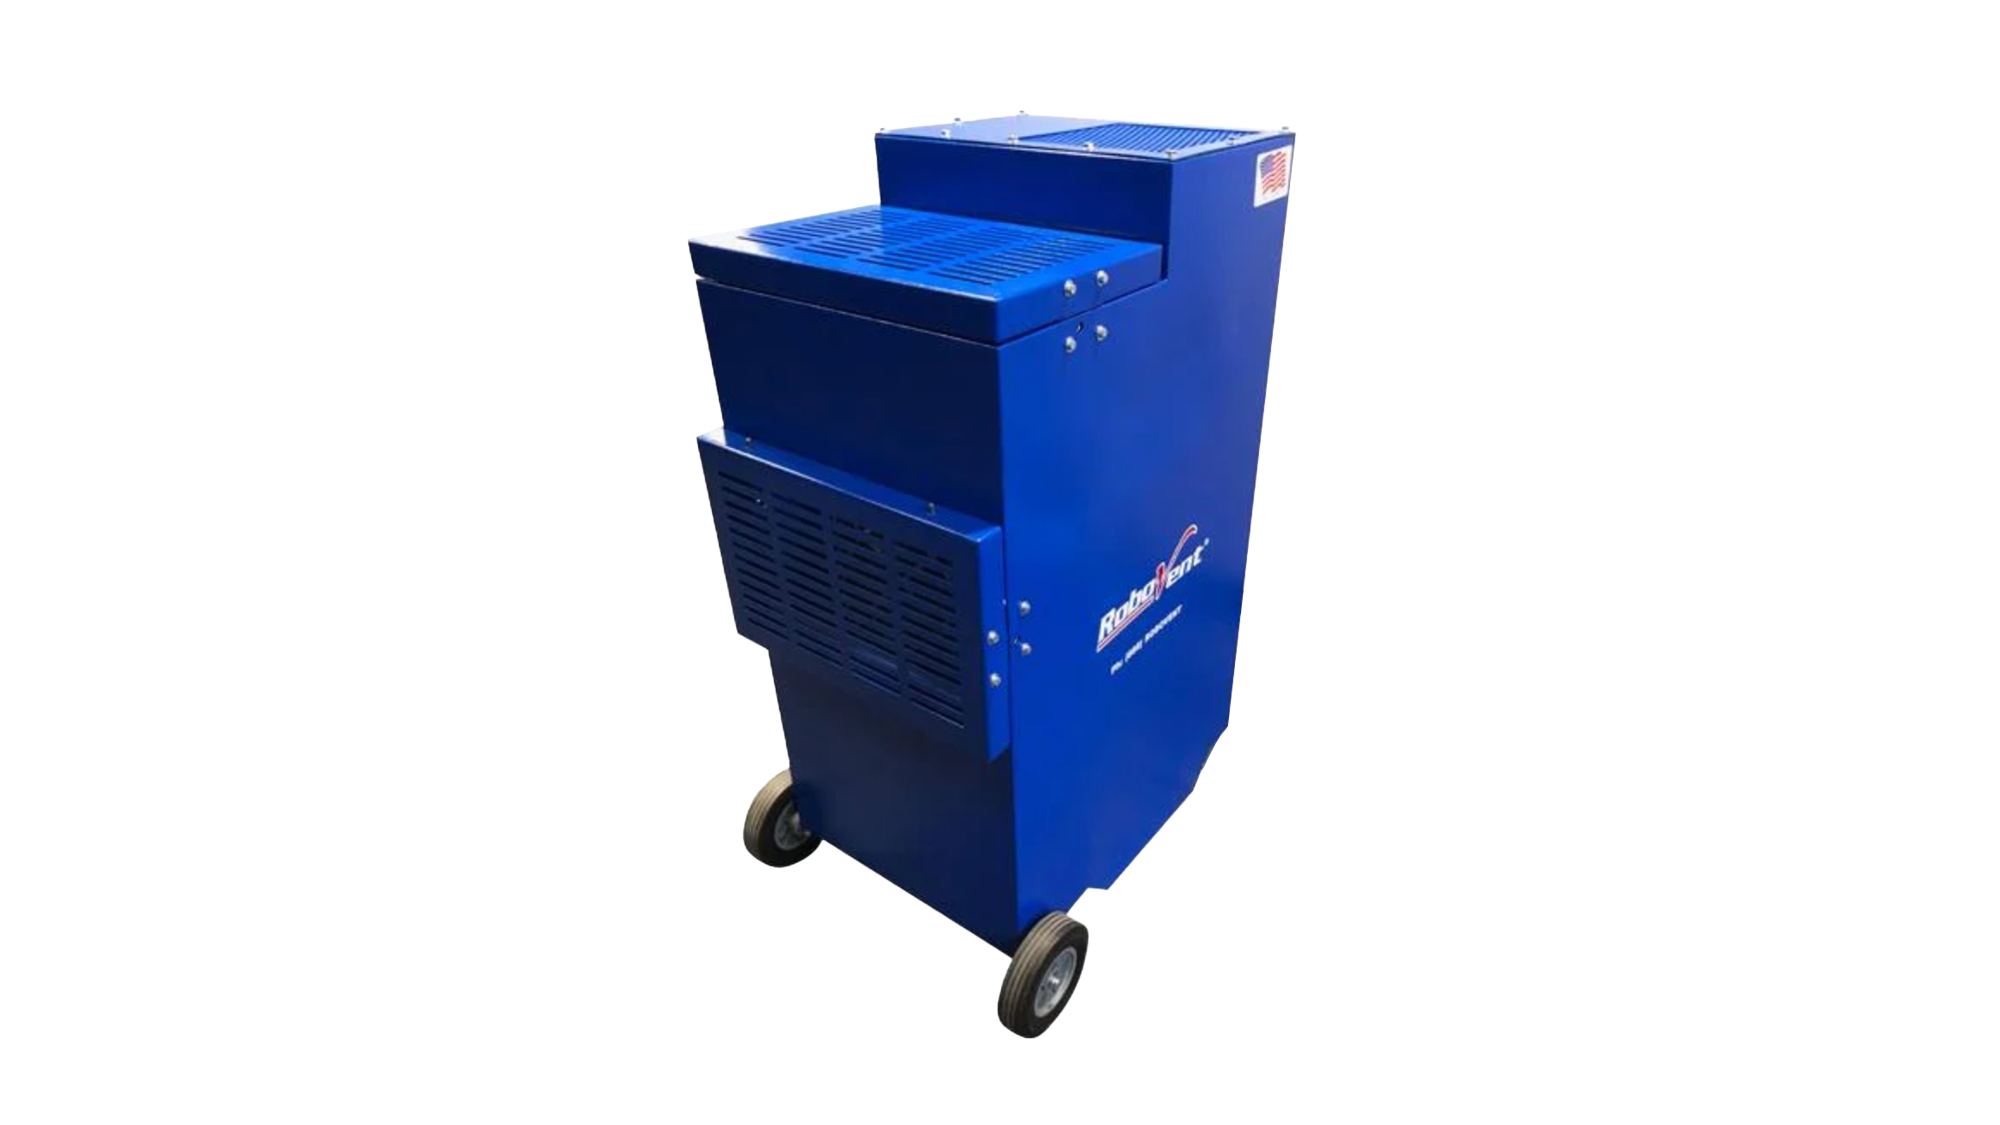 RoboVent PRC 1200 - Portable Room Cleaner